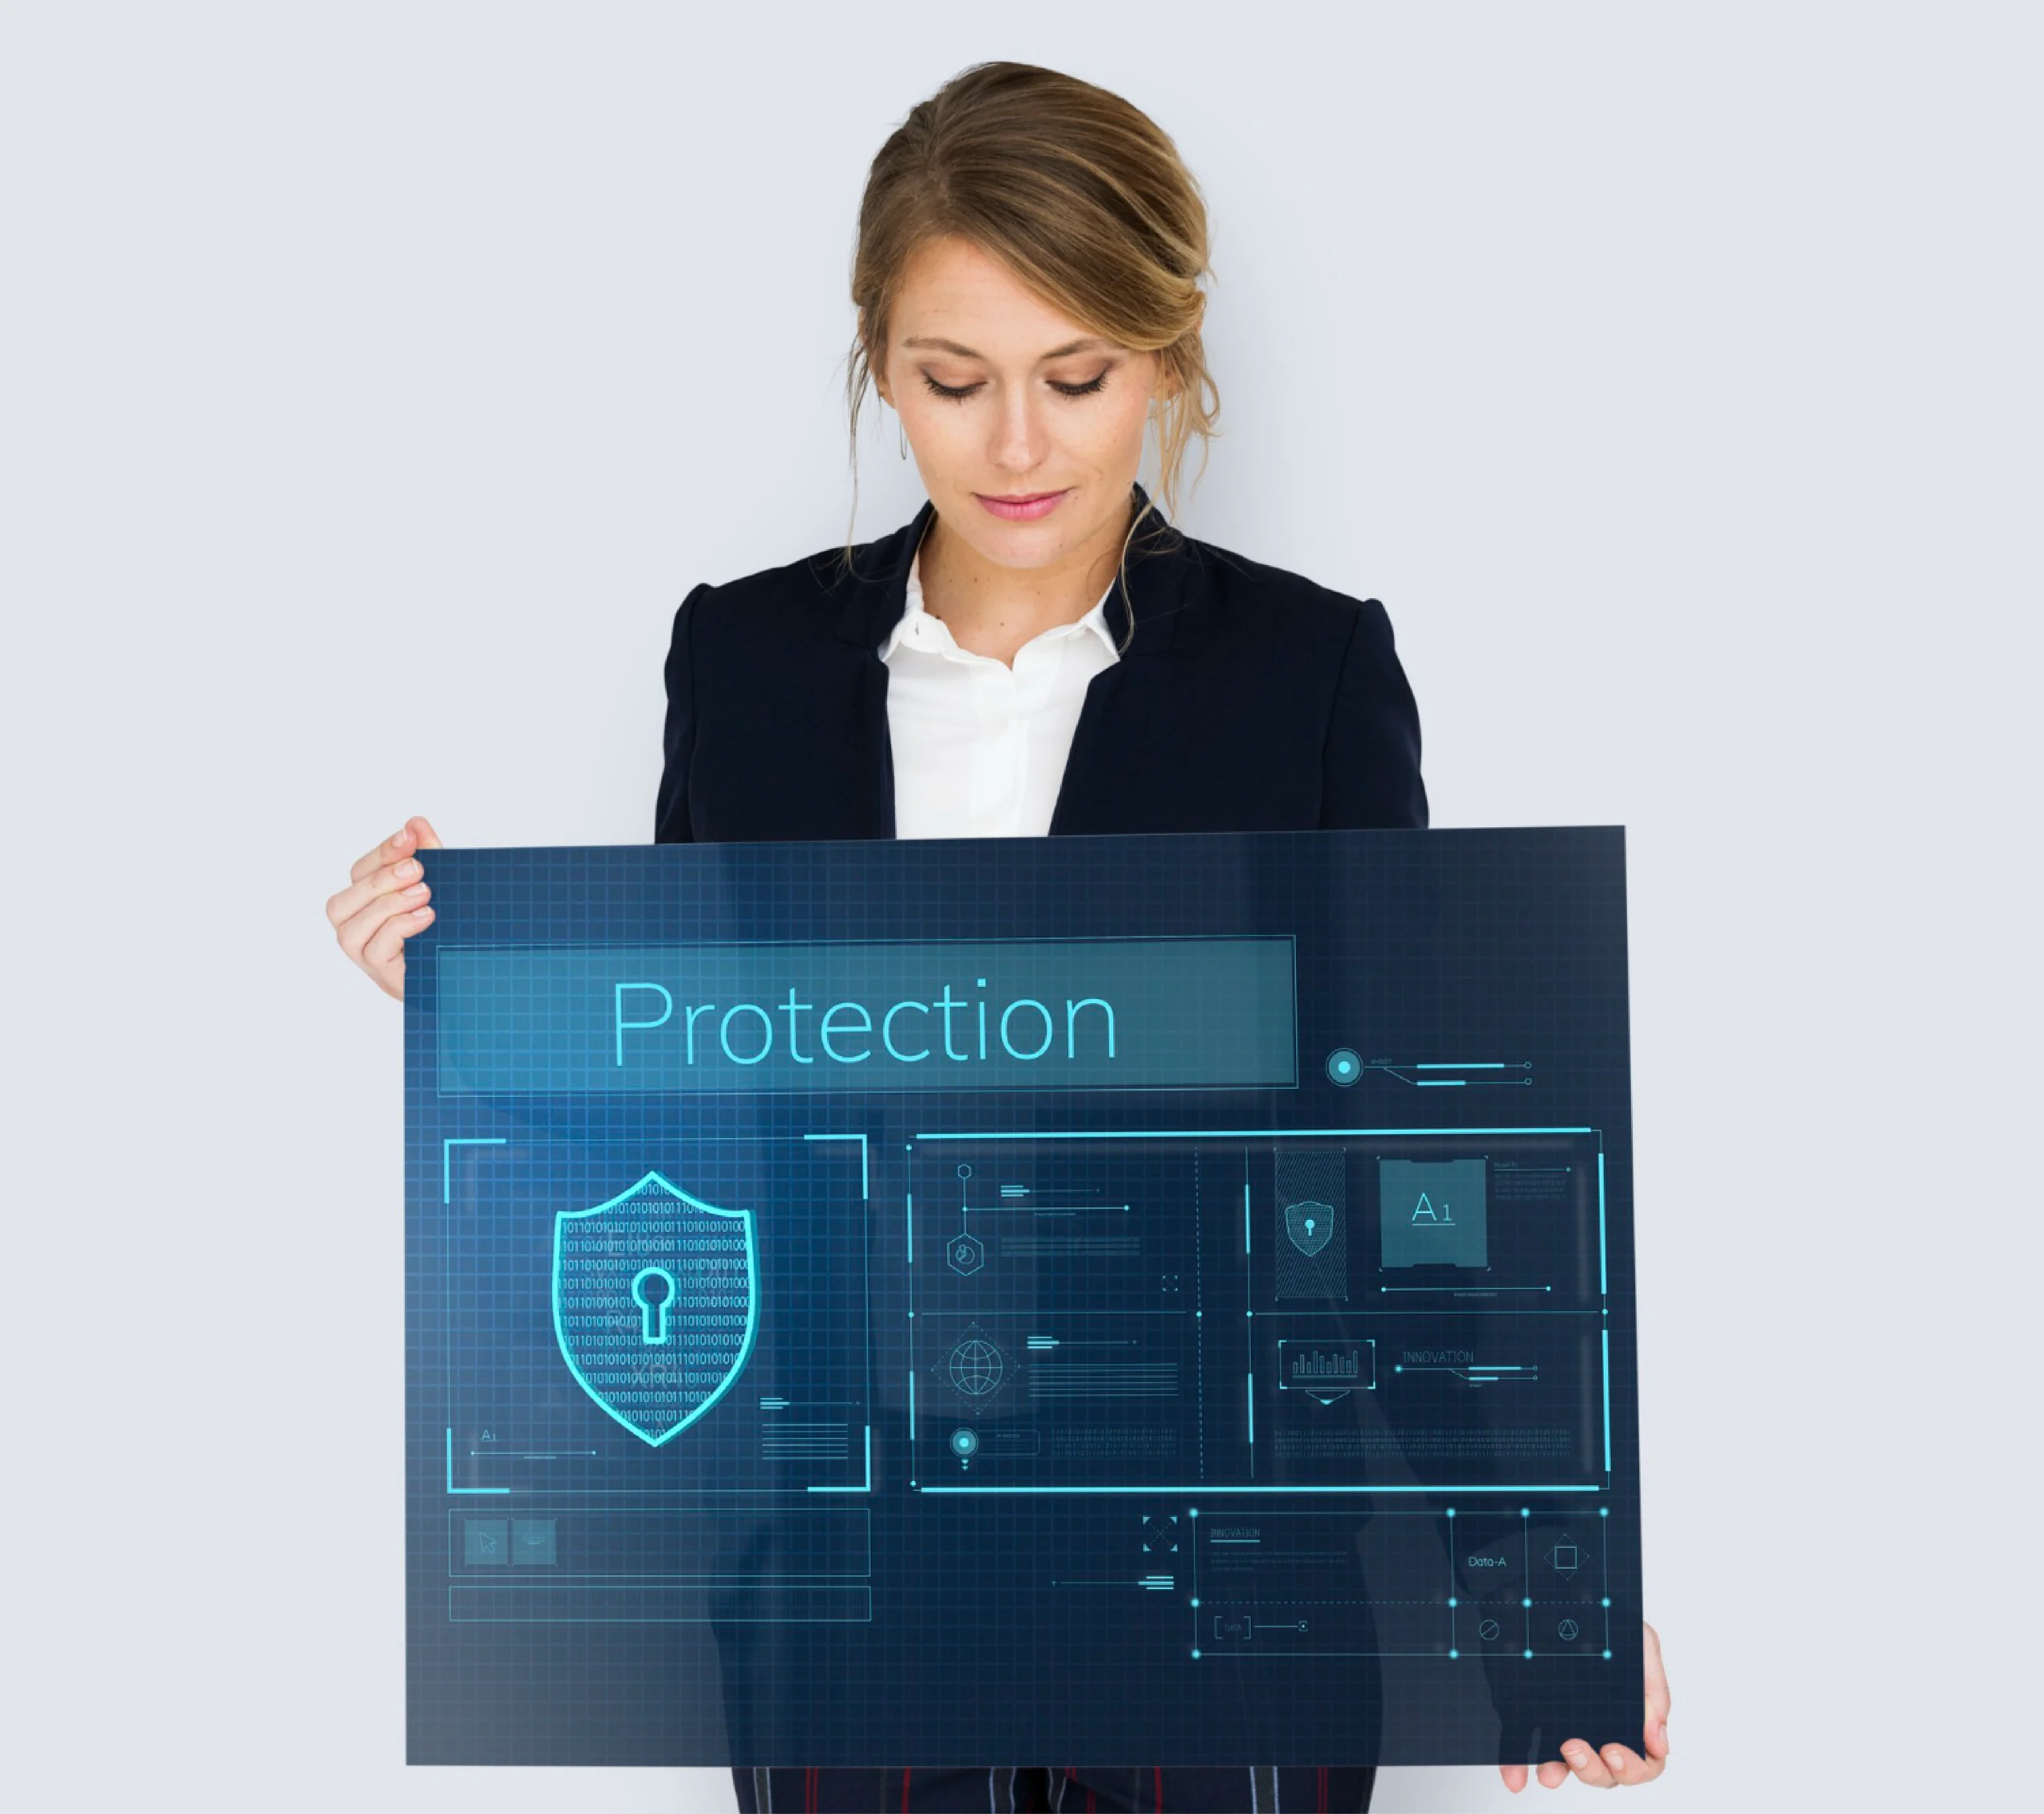 the image guides how to protect your brand online